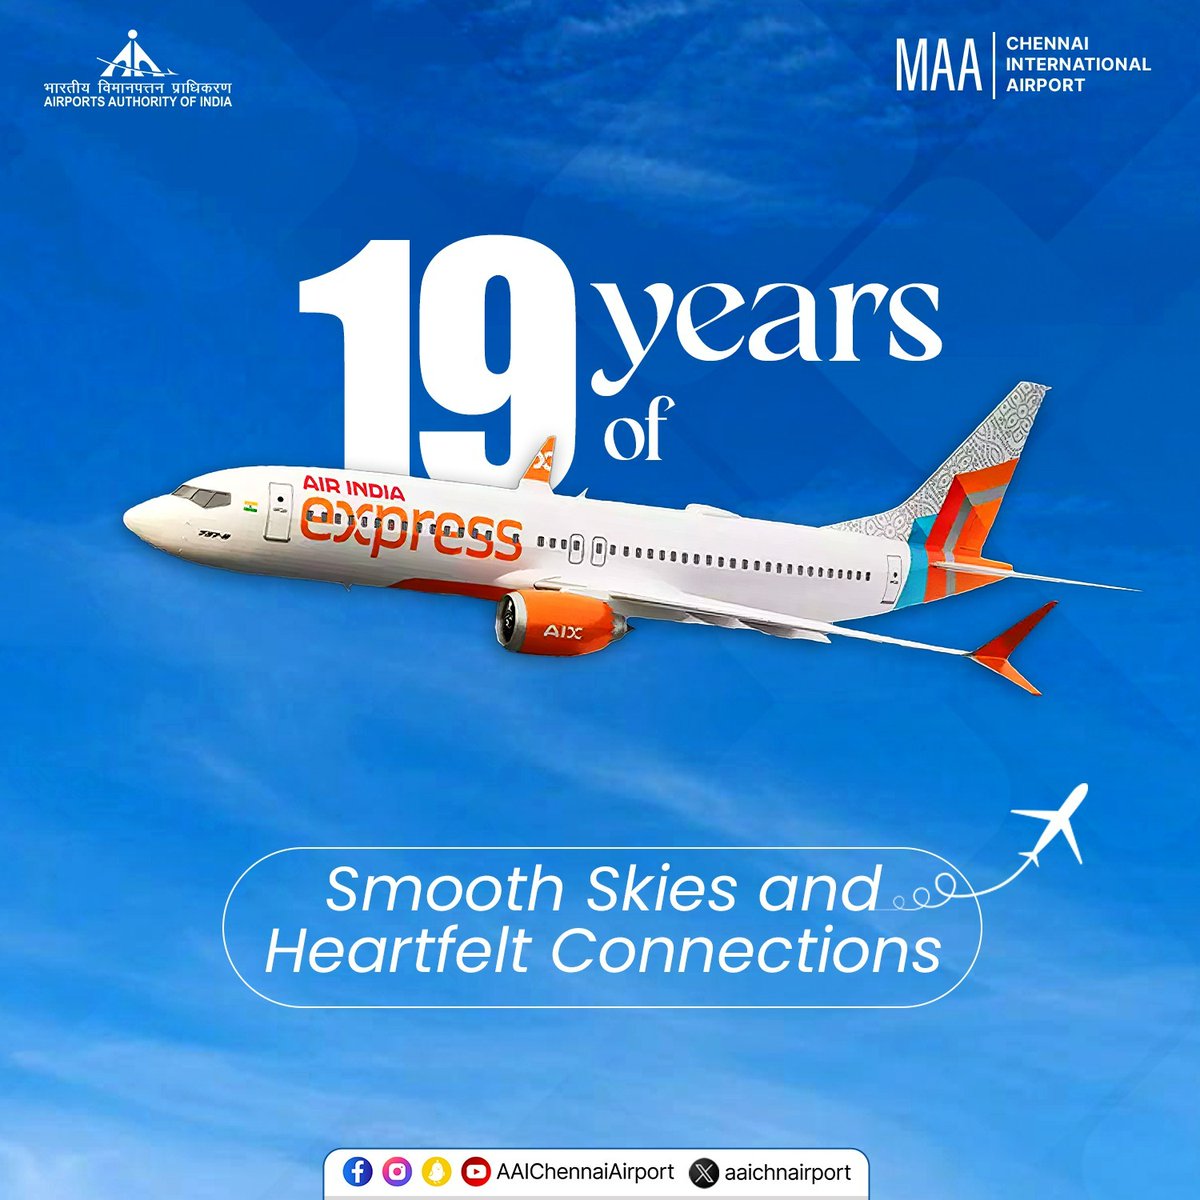 19 years in the skies! Congrats to Air India Express @AirIndiaX for nearly two decades of connecting destinations and enriching journeys. #ChennaiAirport #AAI #MAAAirport #Aviation #Airline #Anniversary #AAIAirports #AirIndiaExpress @MoCA_GoI | @AAI_Official